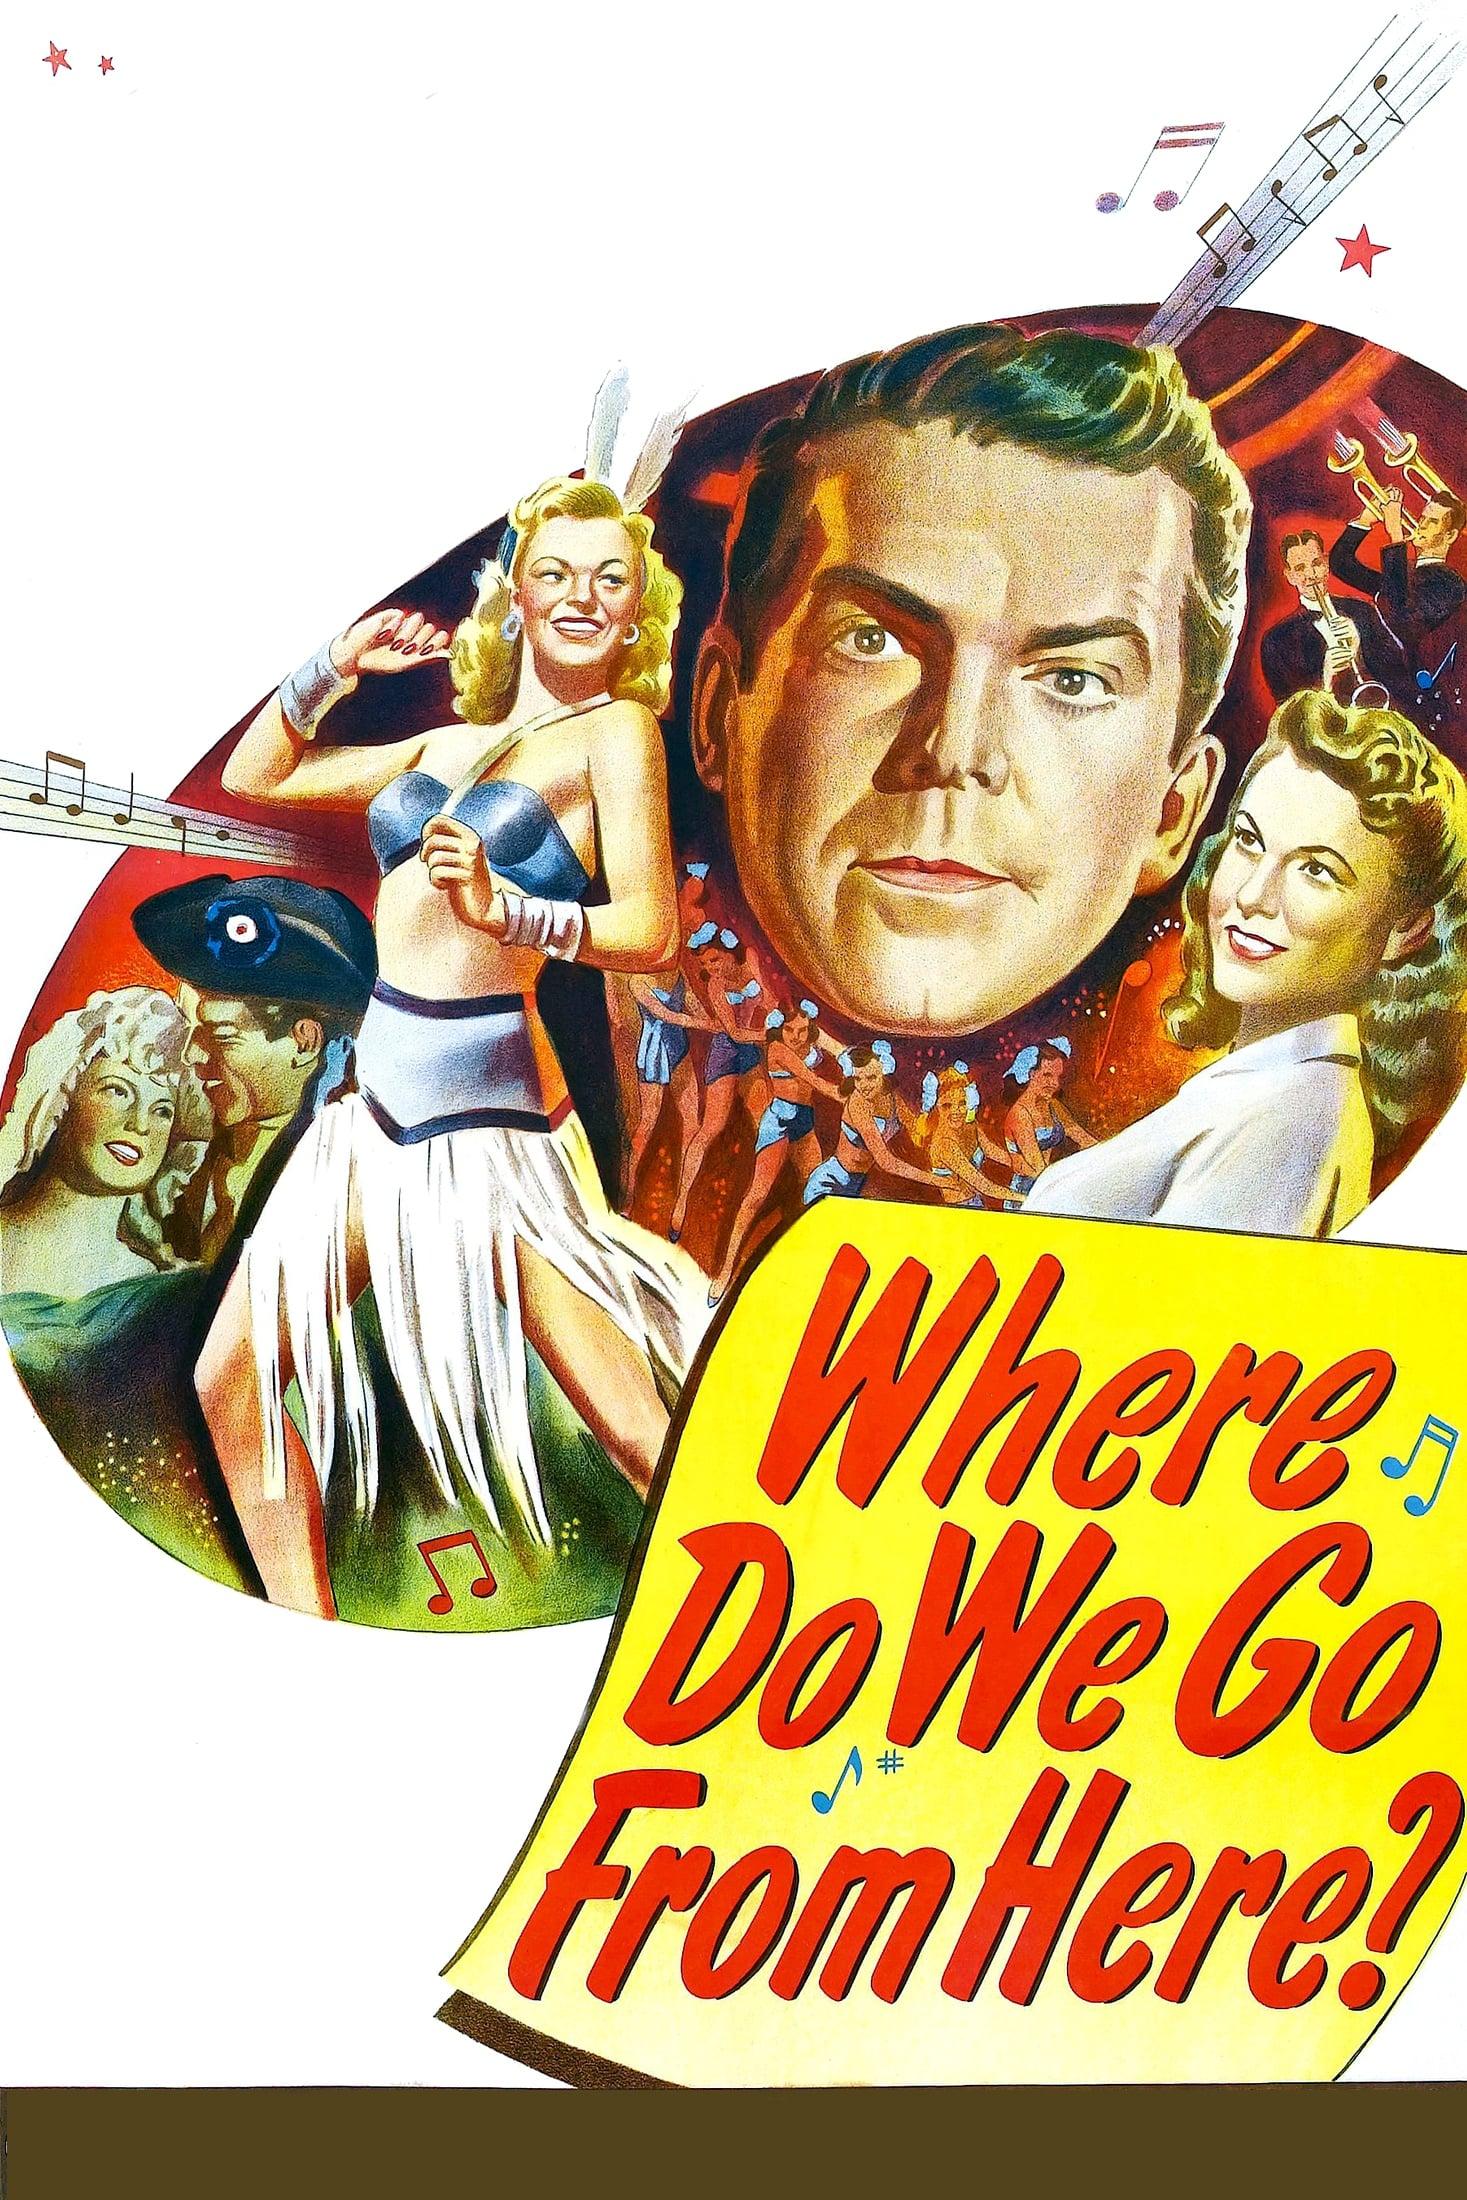 Where Do We Go from Here? poster